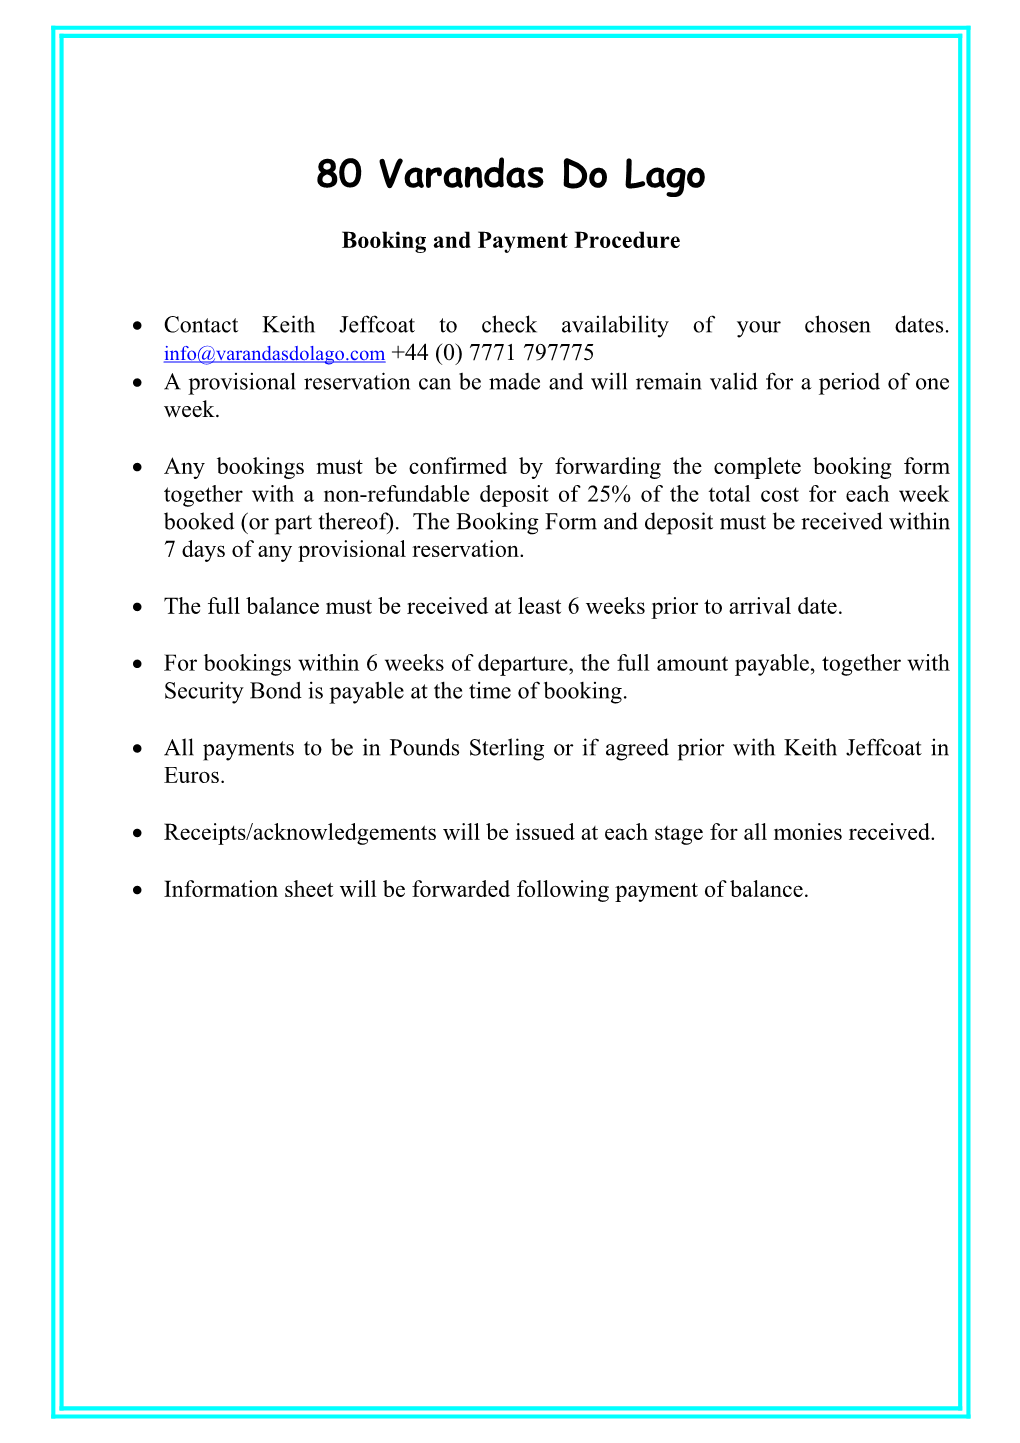 Booking and Payment Procedure